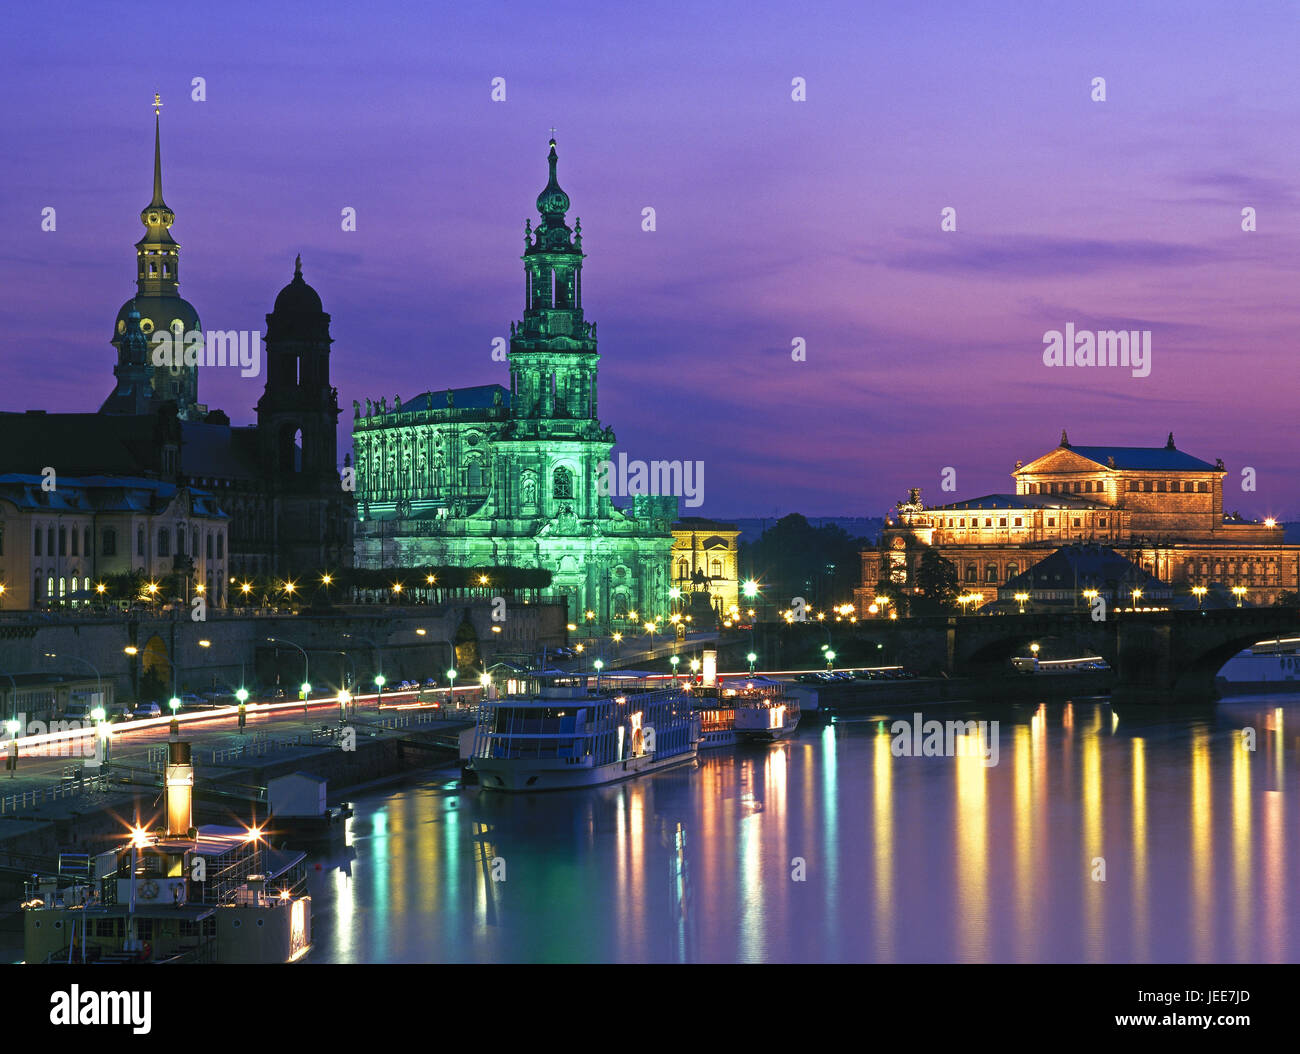 Germany, Saxony, Dresden, Old Town, lighting, evening, town, place of interest, destination, riverside, lock, court church, kennel, Semperoper, building, structures, architecture, darkness, outside, mirroring, water surface, Stock Photo